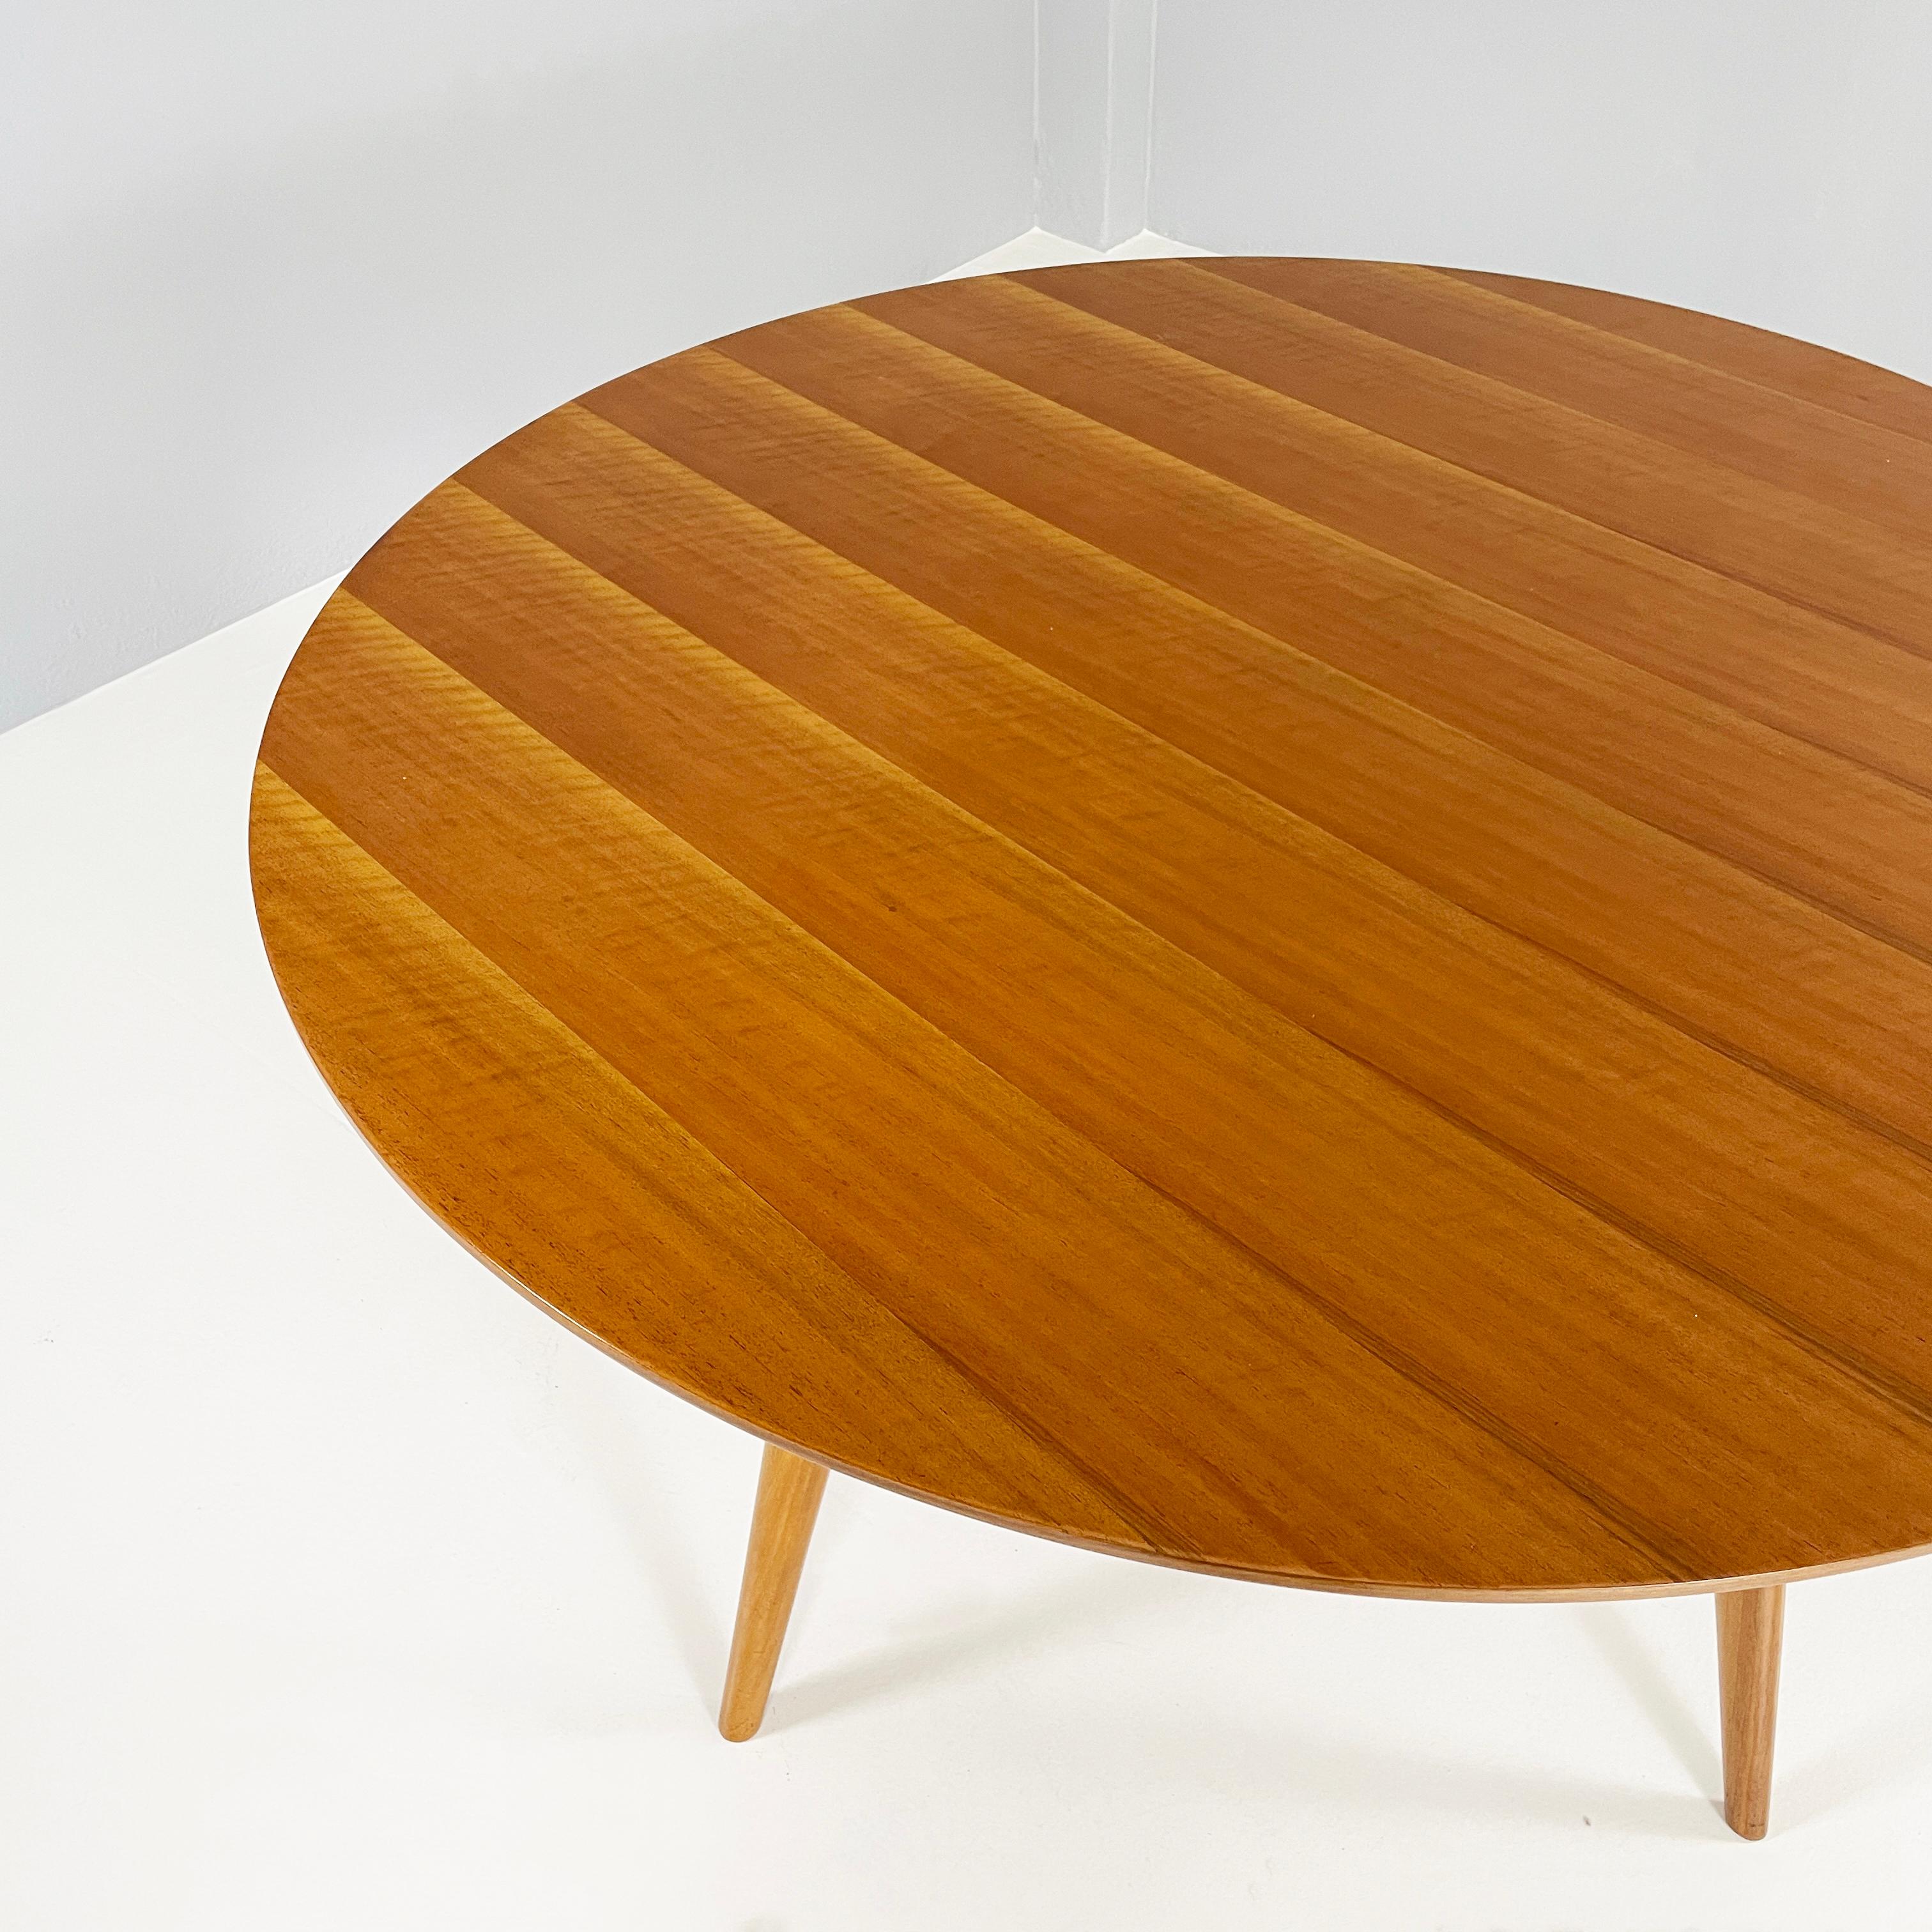 Italian mid-century modern Wooden dining table with extension, 1960s For Sale 2